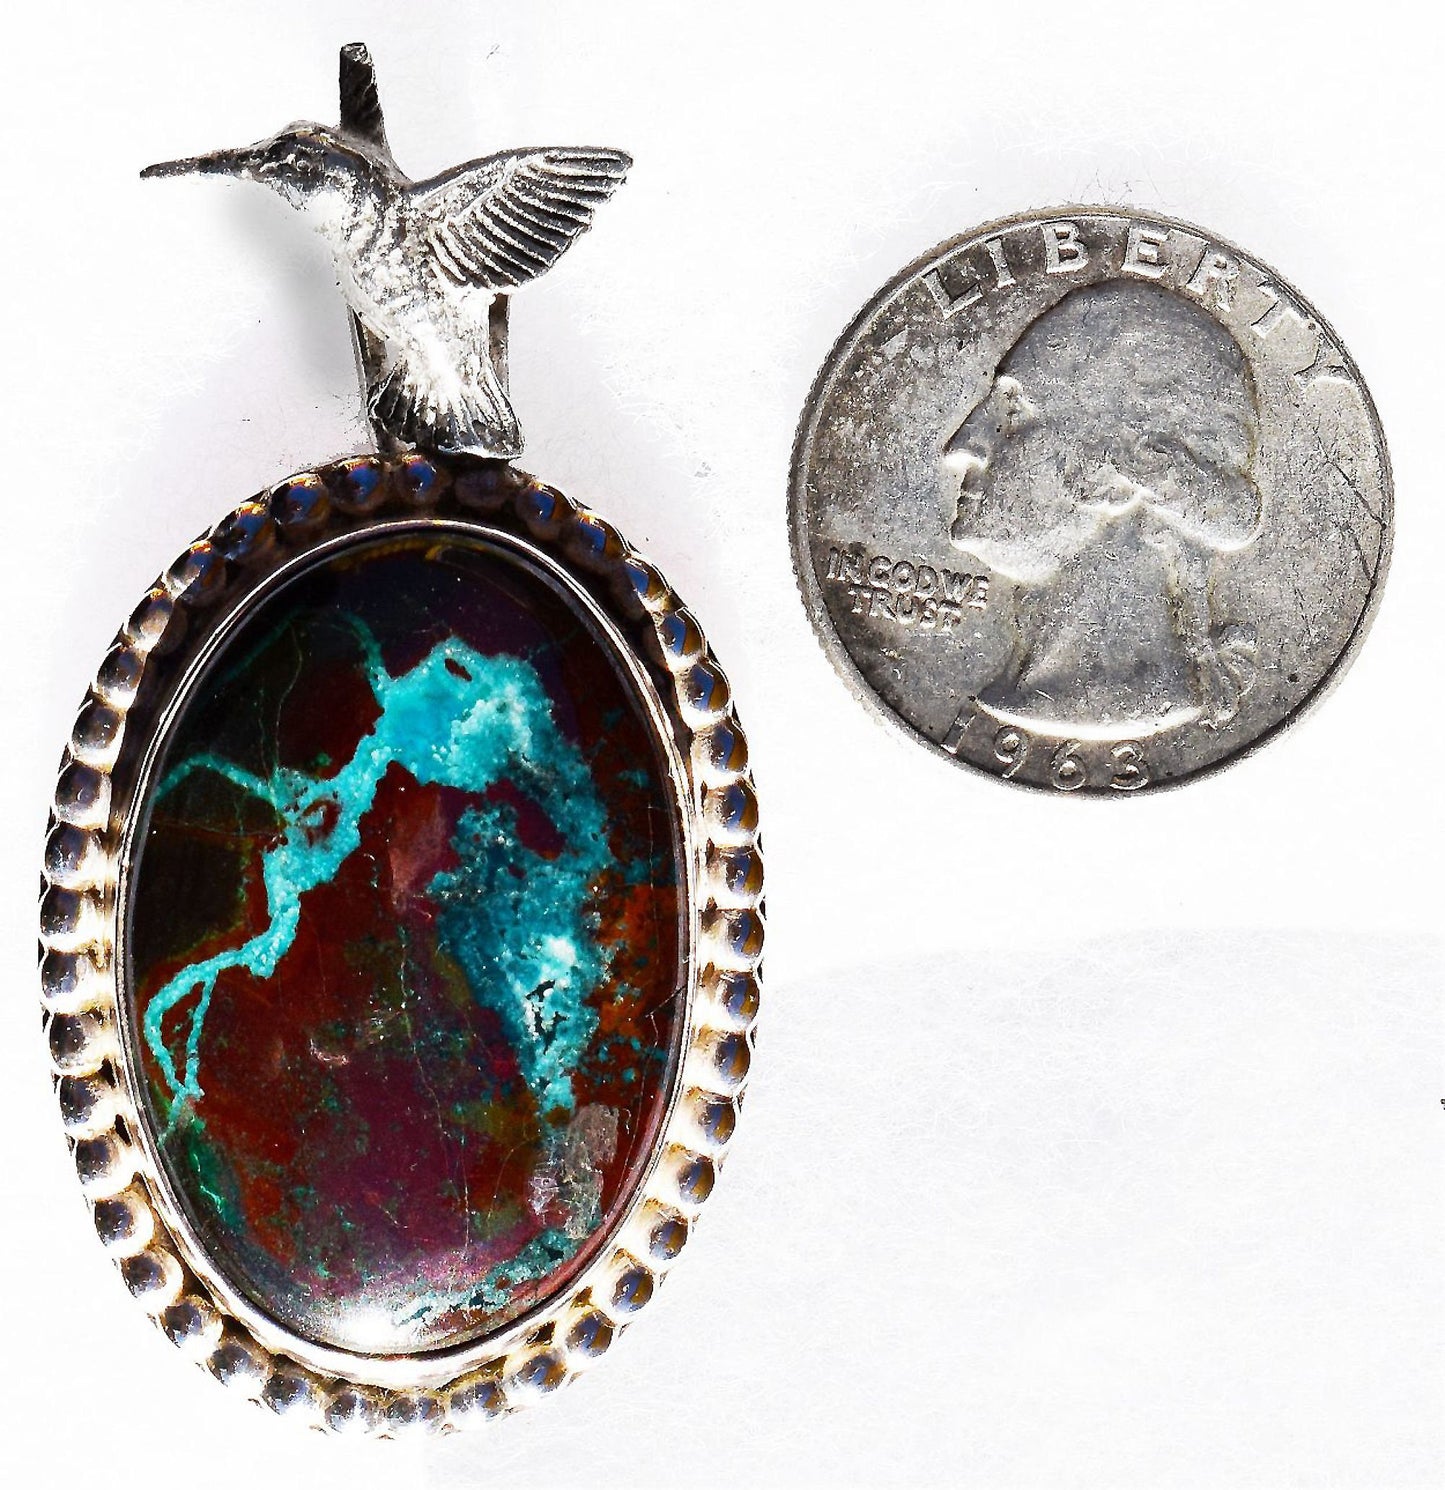 Chrysocolla lightning bolt through Tenorite base, hand set in sterling silver just for you!